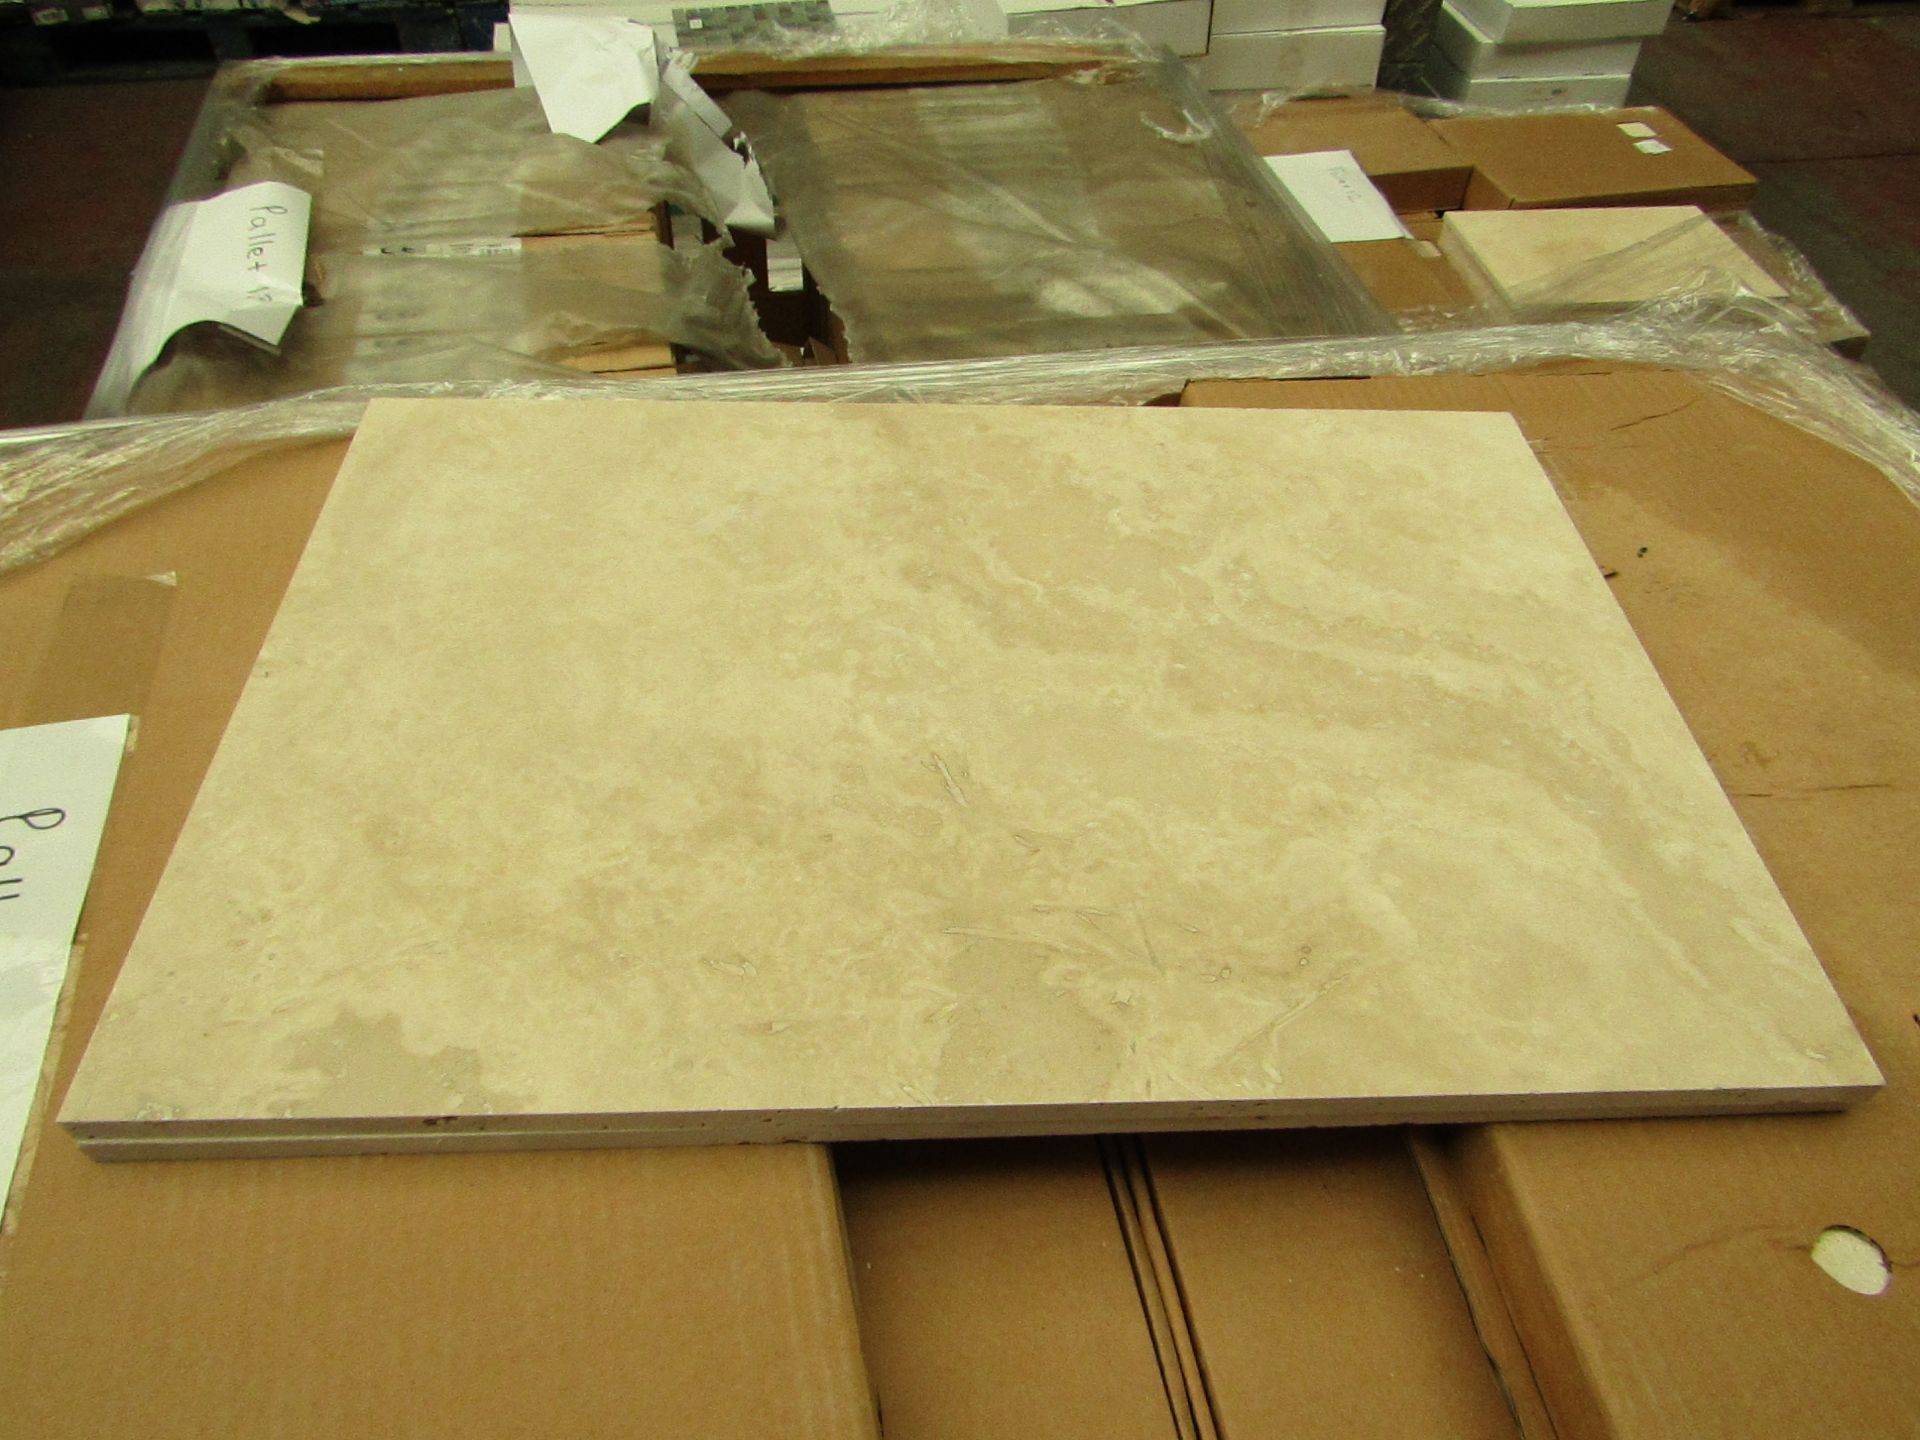 20x packs of 3 Ceramica Travetine honed and filled Medium Beige 612x402mm, RRP £26 a pack giving a